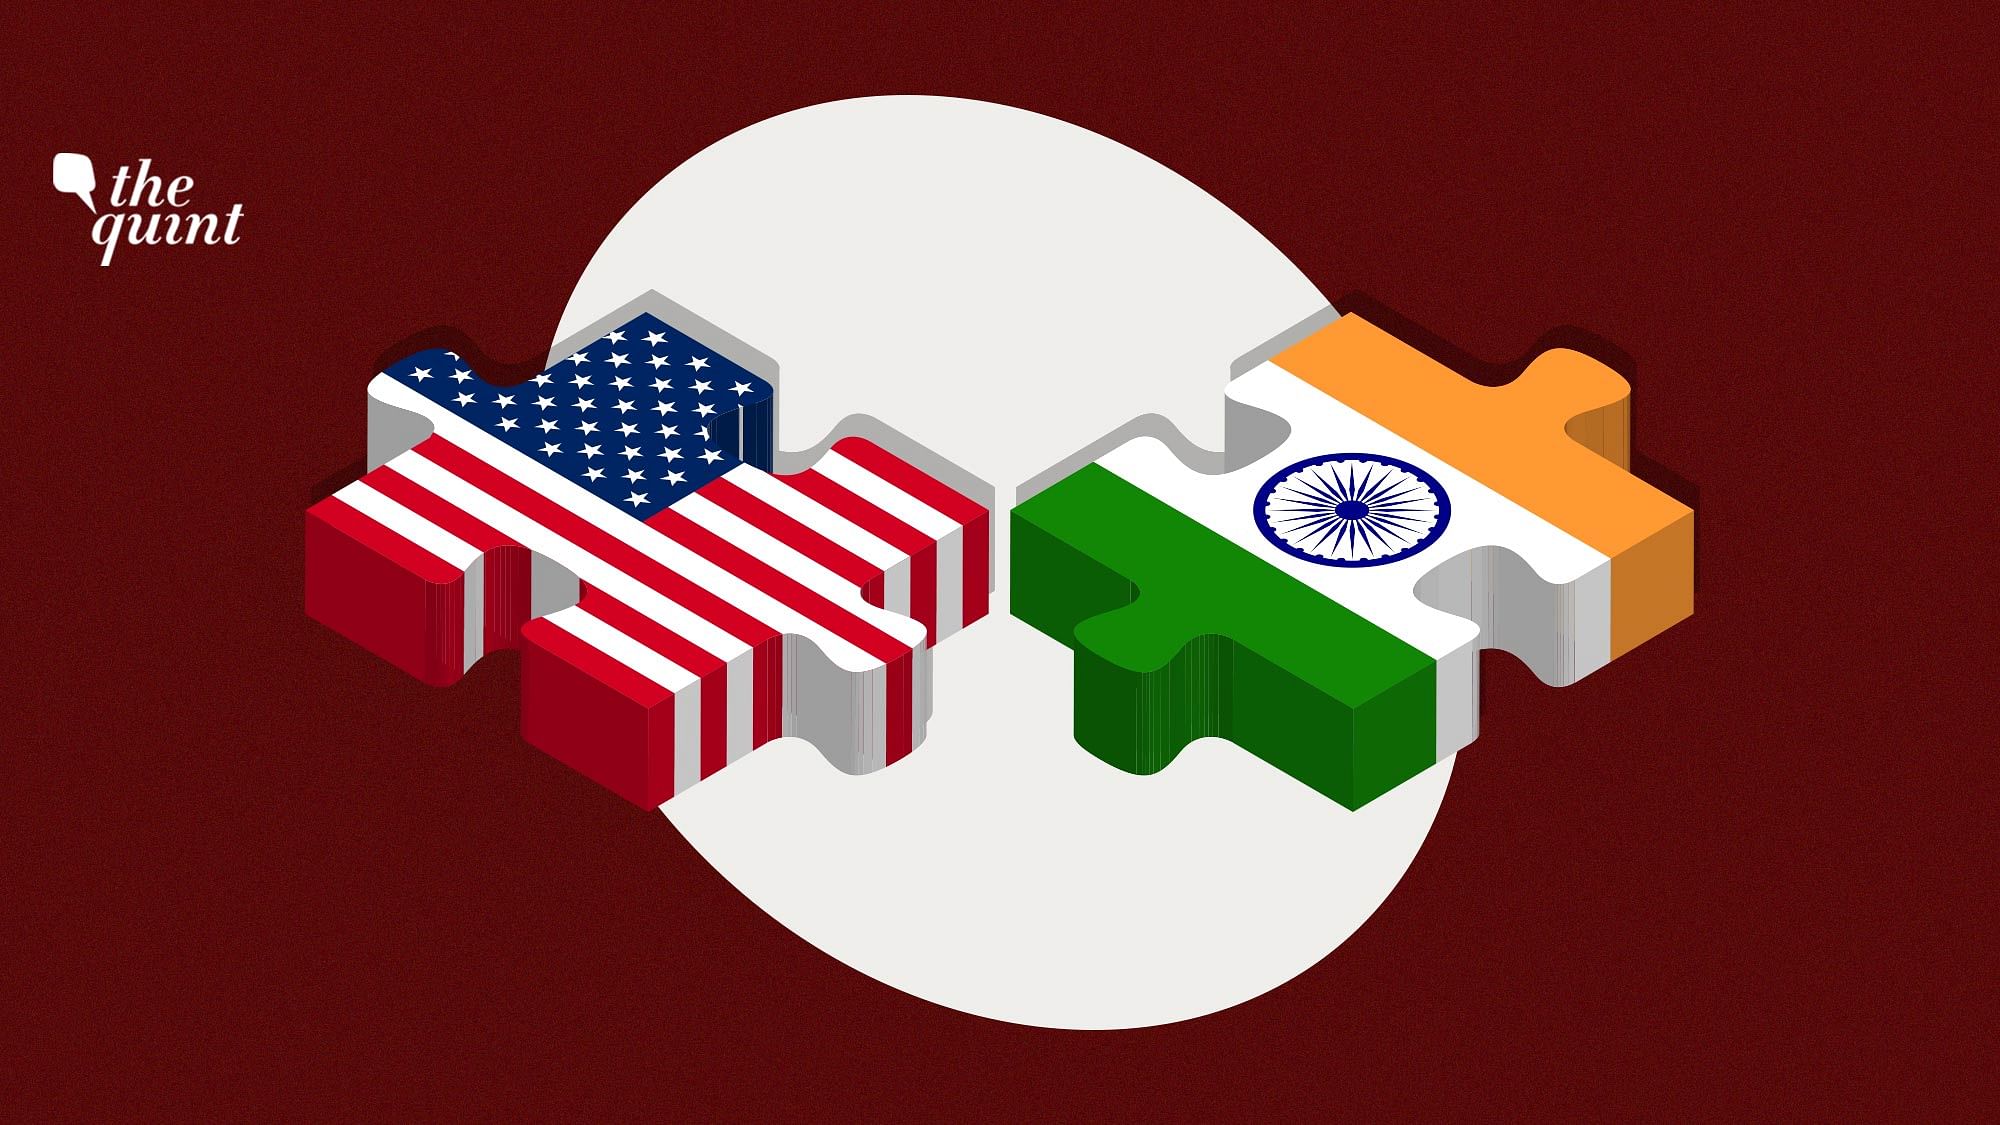 Image of US and Indian flags used for representational purposes.